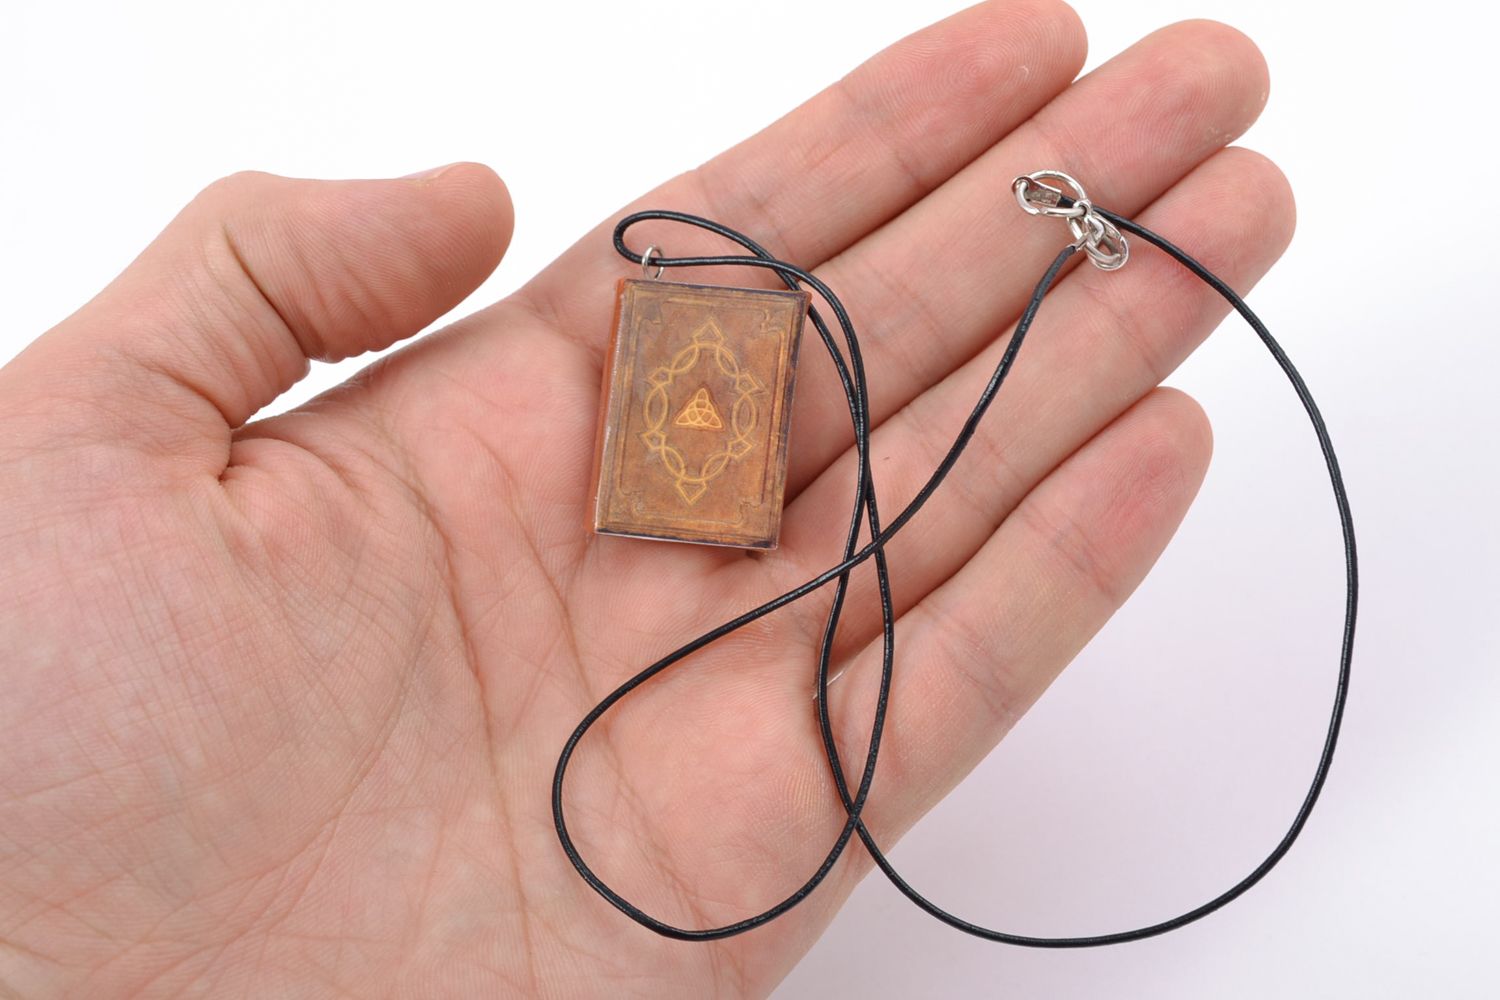 Polymer clay pendant in the shape of book with leather cord photo 1